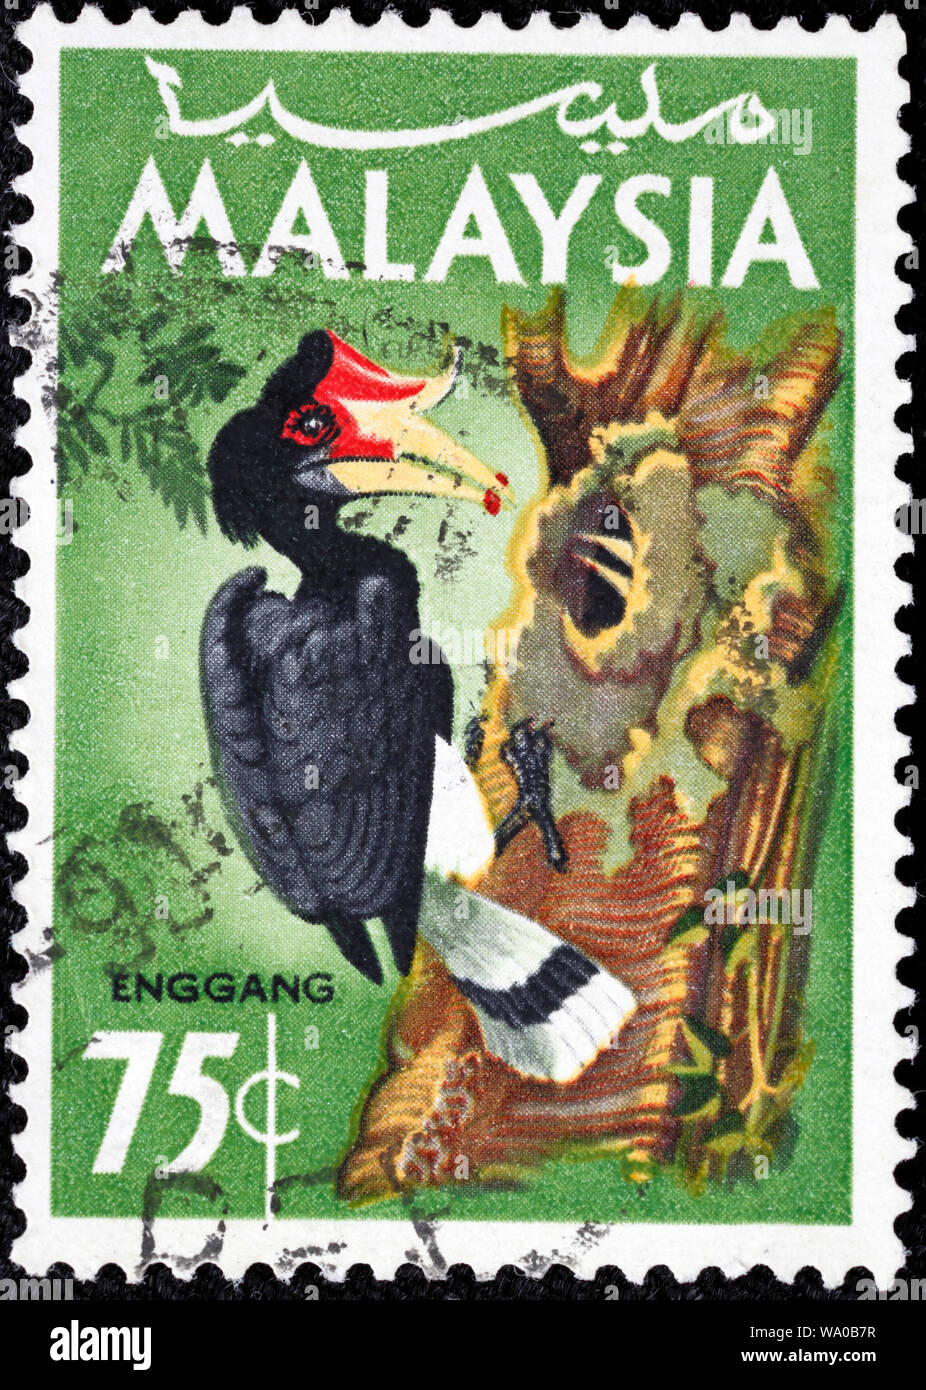 Abyssinian Ground-hornbill, Northern Ground-hornbill, Enggang, Bucorvus abyssinicus, postage stamp, Malaysia, 1965 Stock Photo